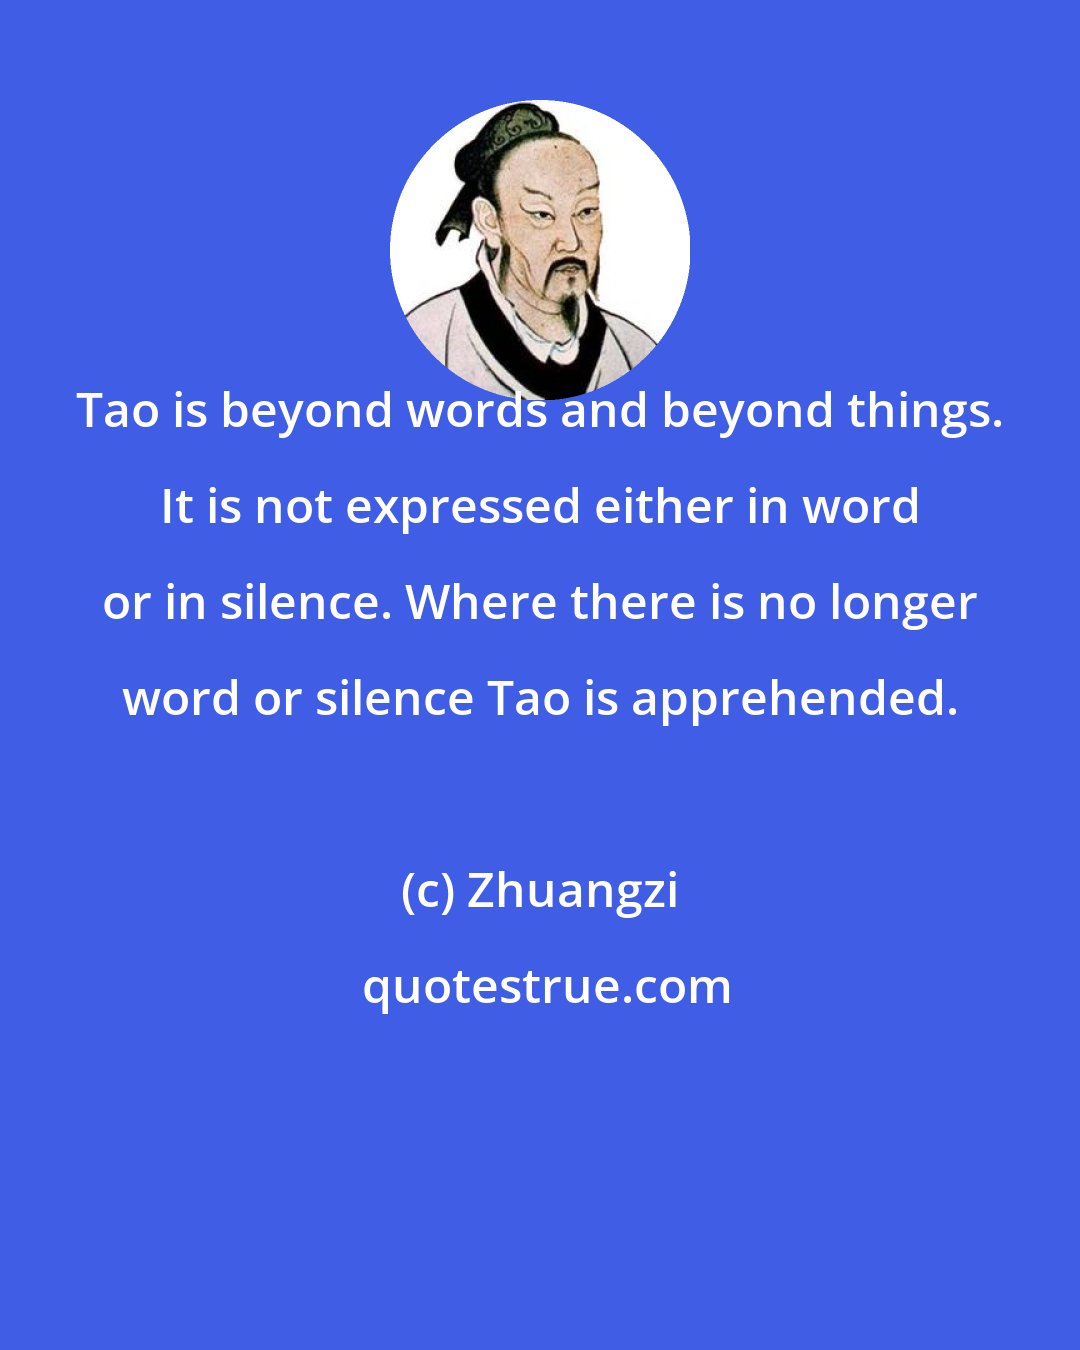 Zhuangzi: Tao is beyond words and beyond things. It is not expressed either in word or in silence. Where there is no longer word or silence Tao is apprehended.